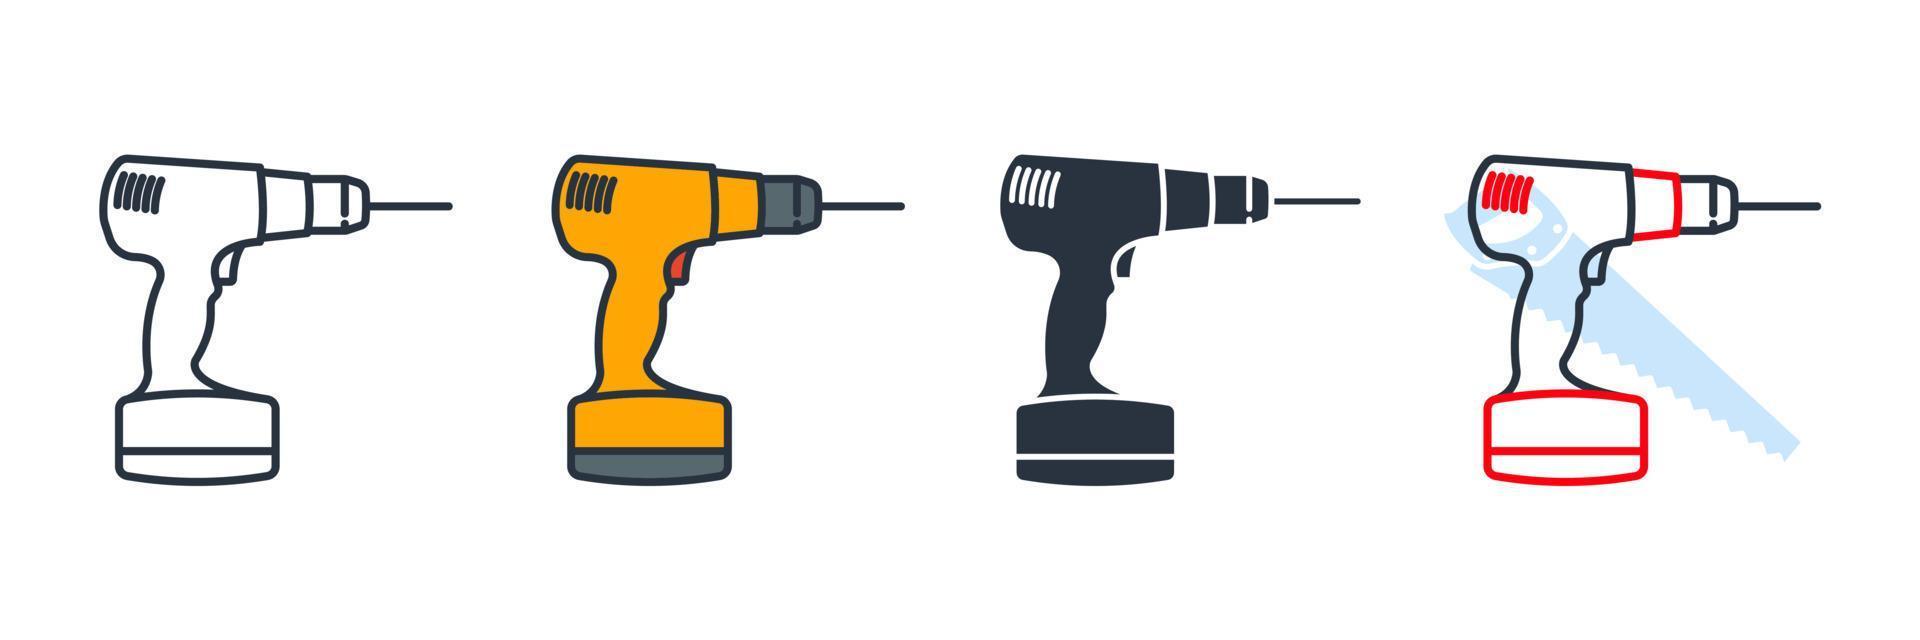 drill icon logo vector illustration. Screwdriver, power drill symbol template for graphic and web design collection